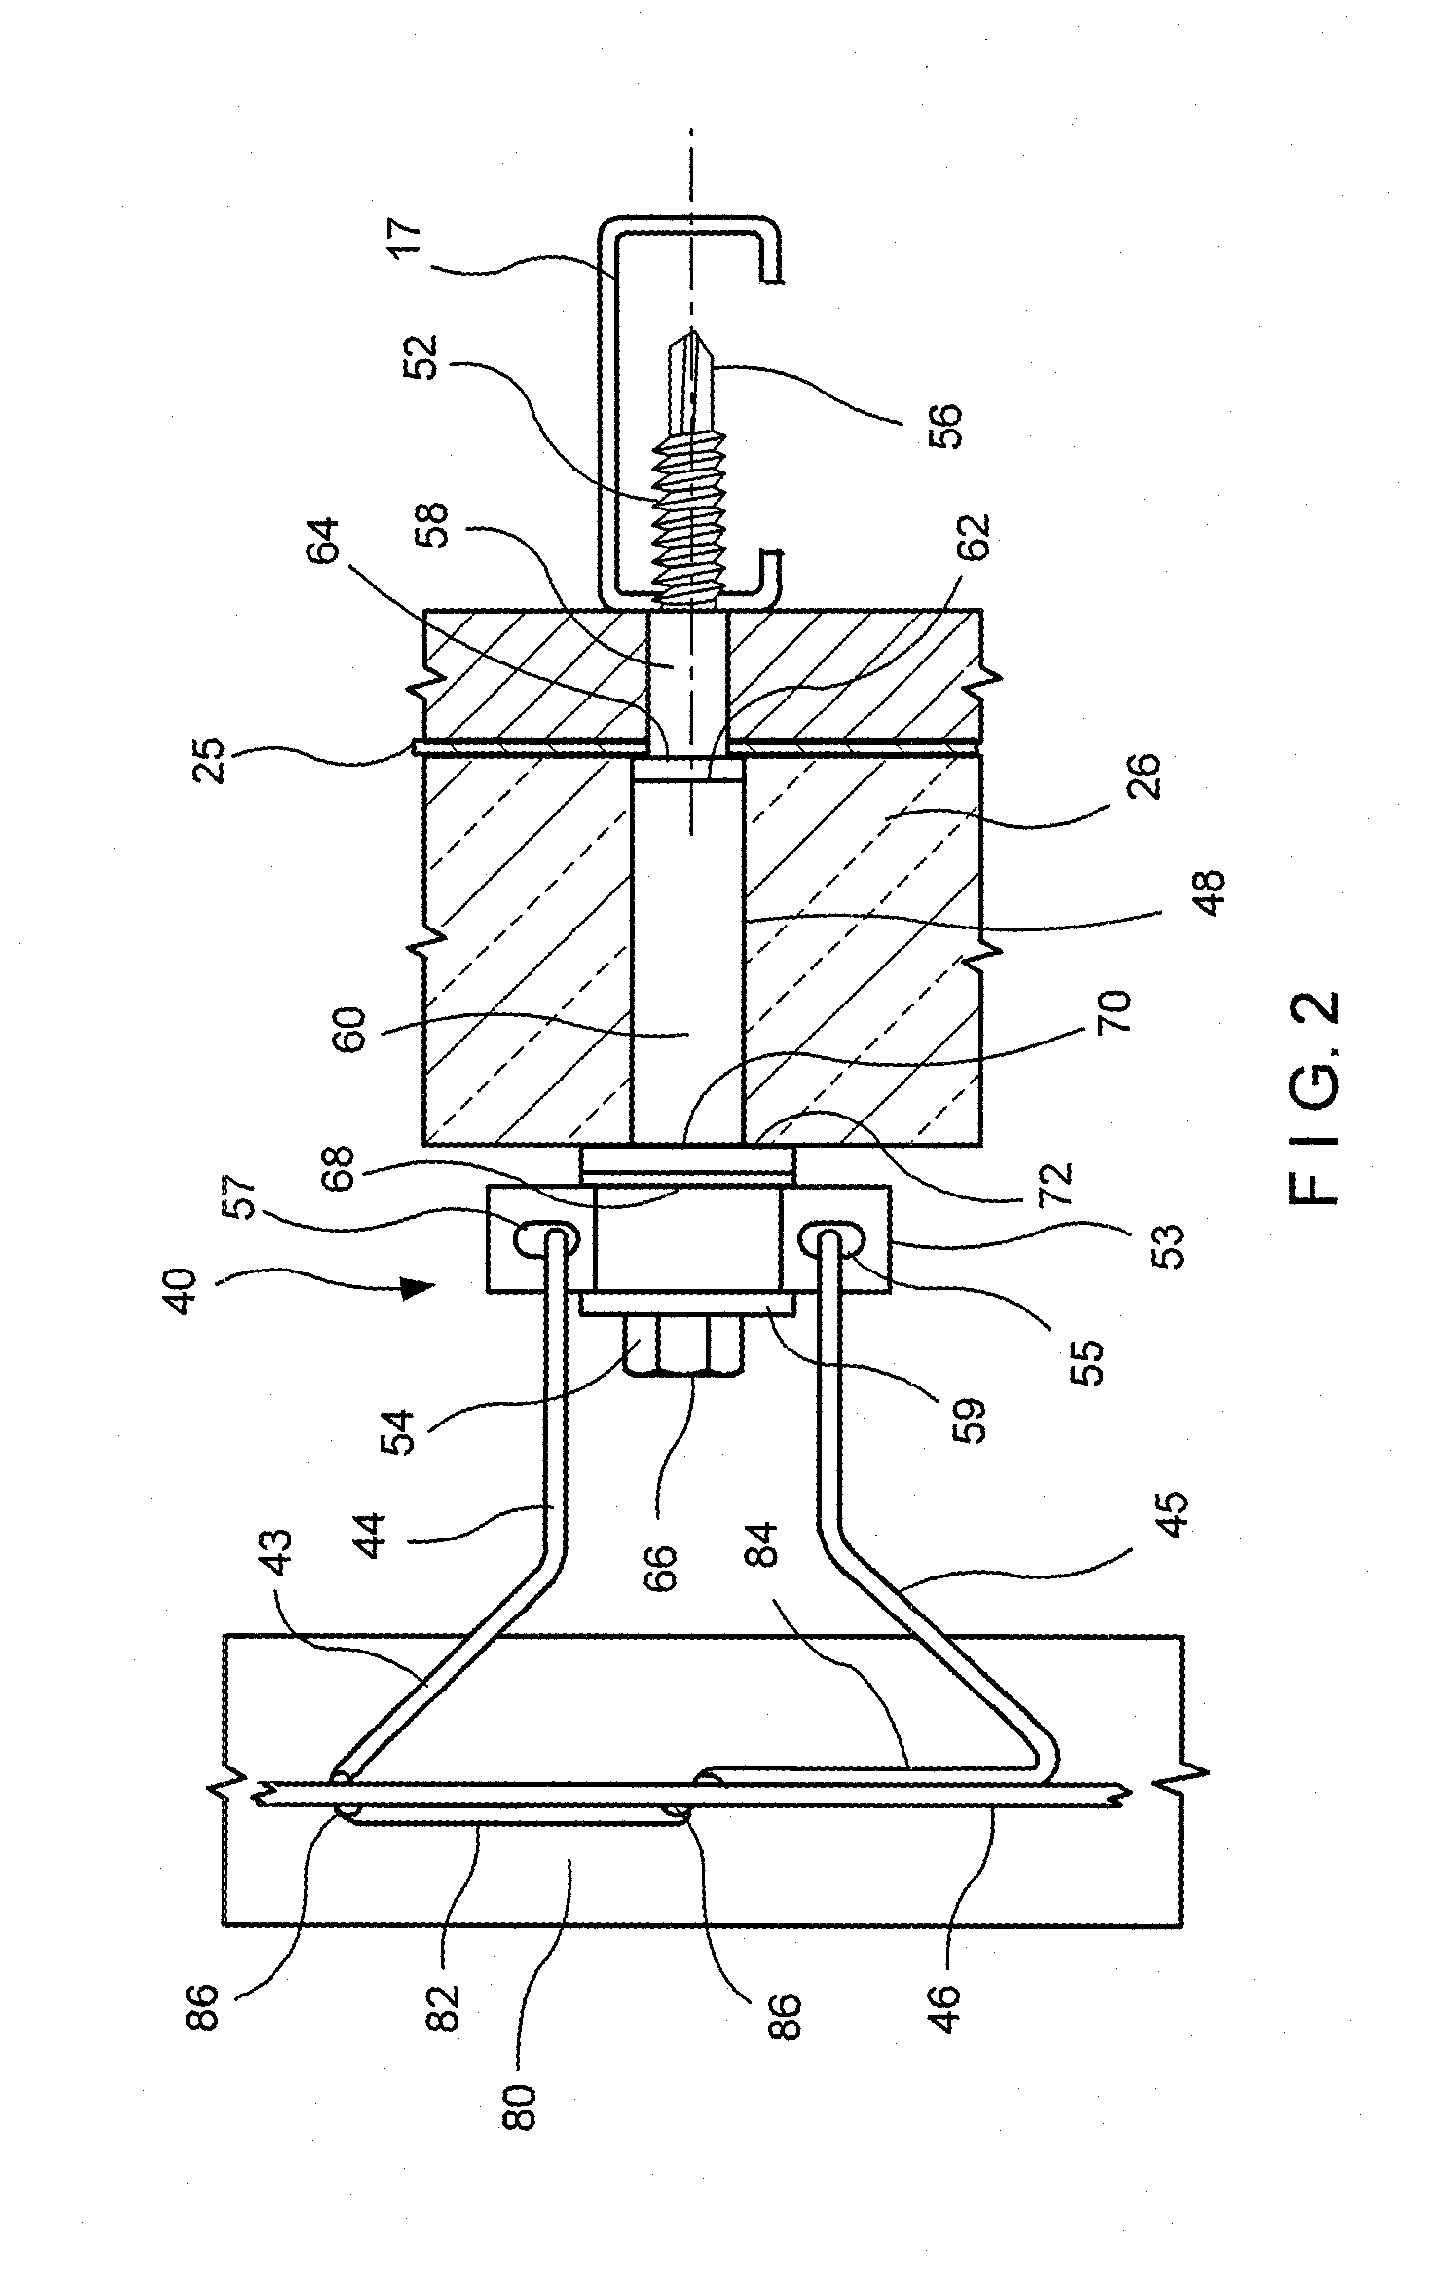 Thermally isolated anchoring system